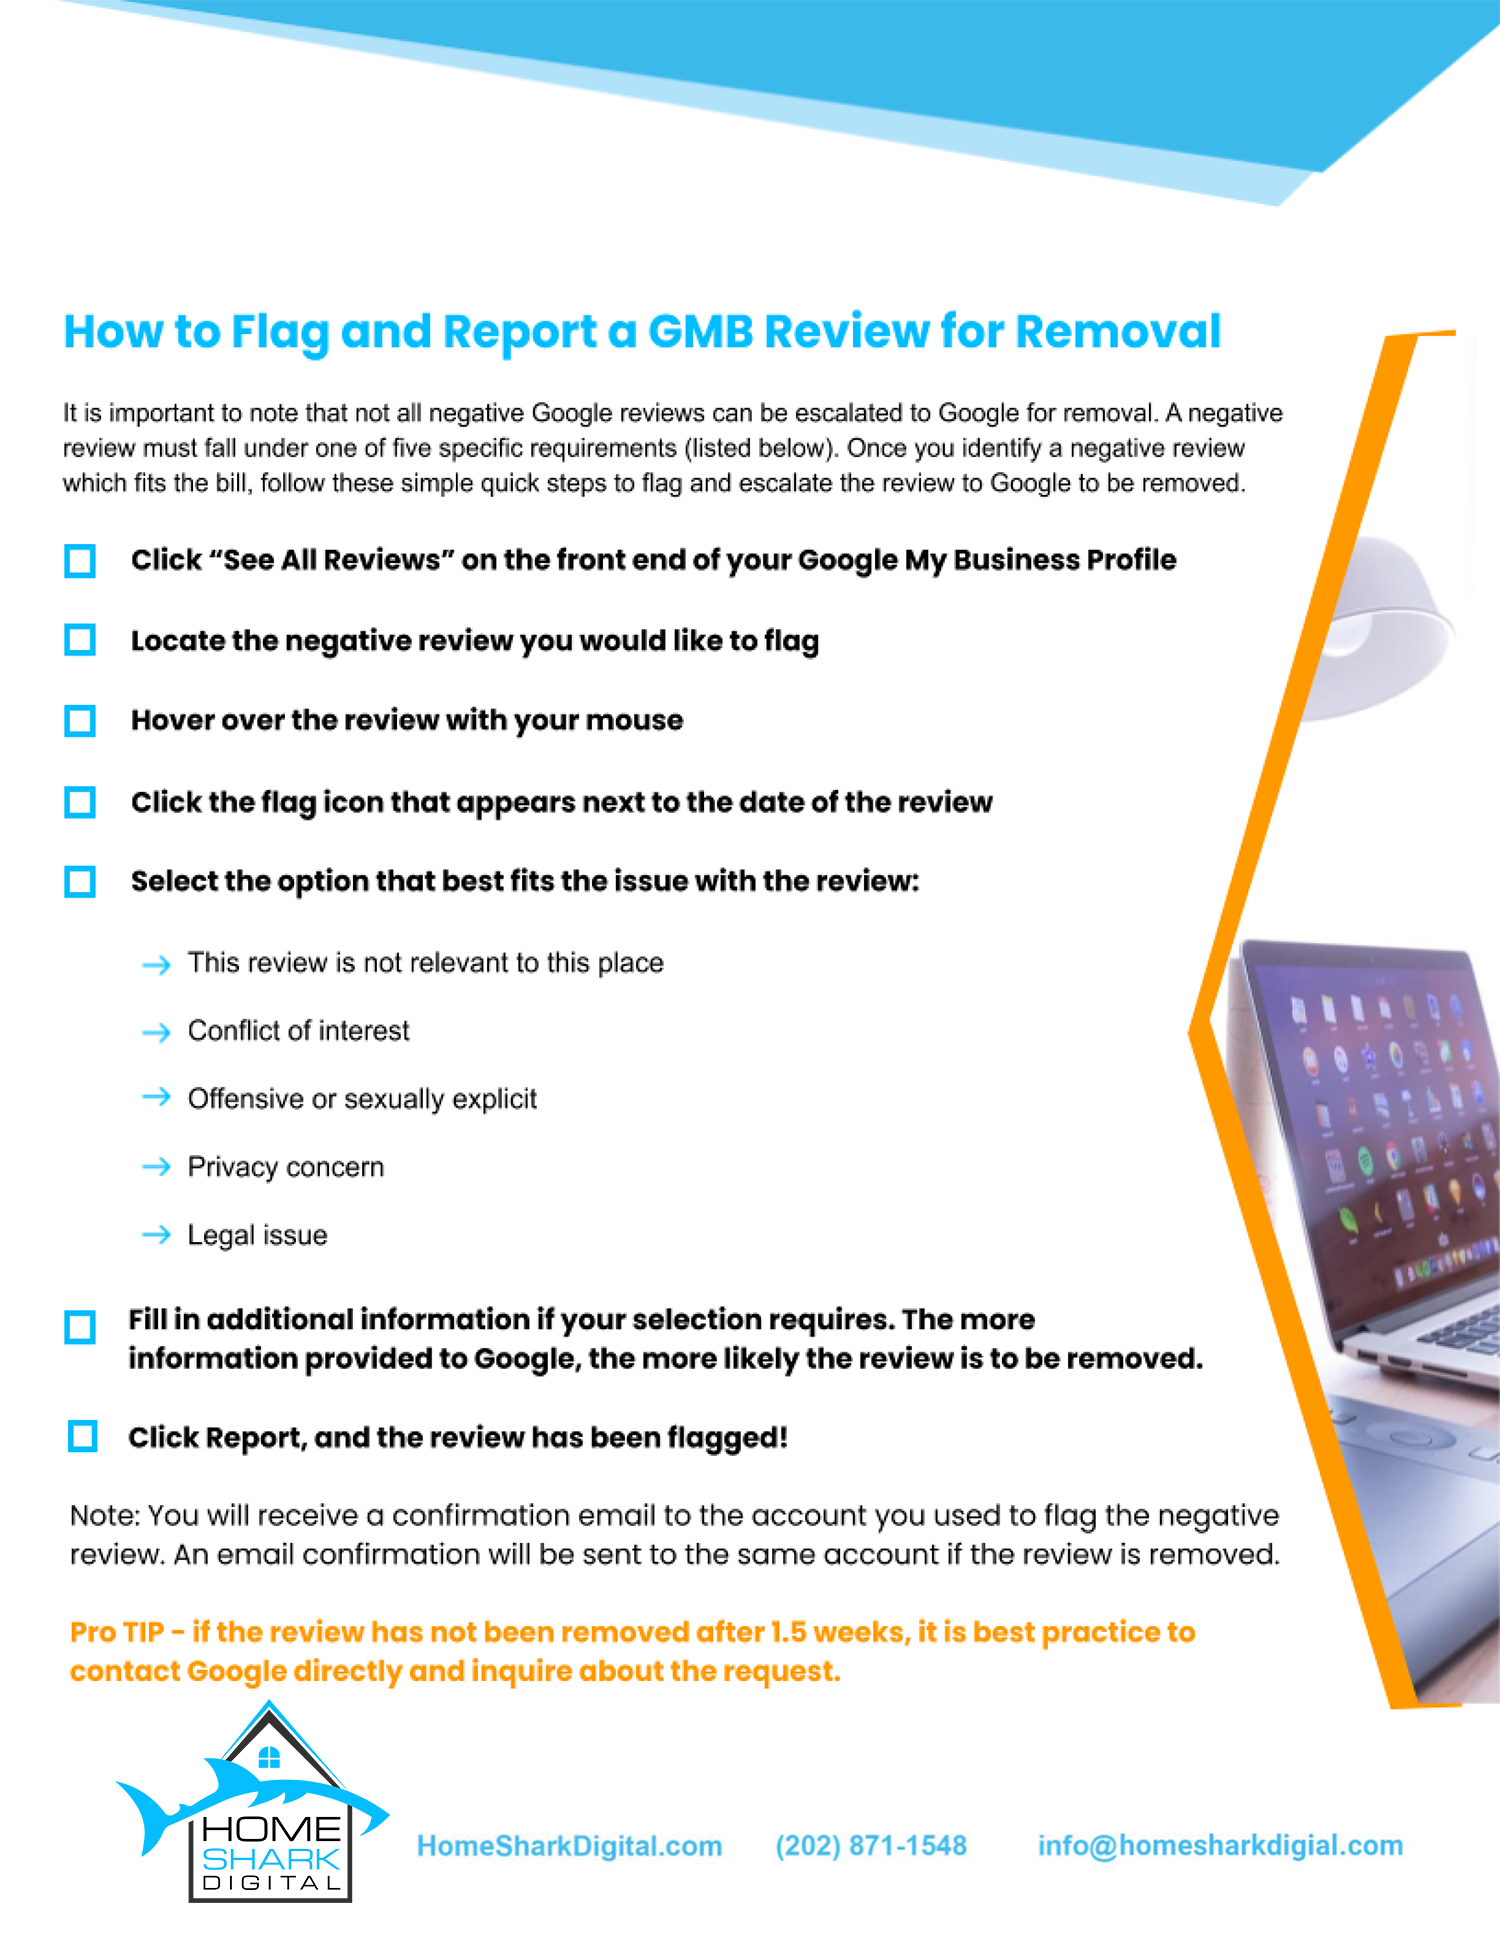 How to Flag And Report a GMB Review For Removal